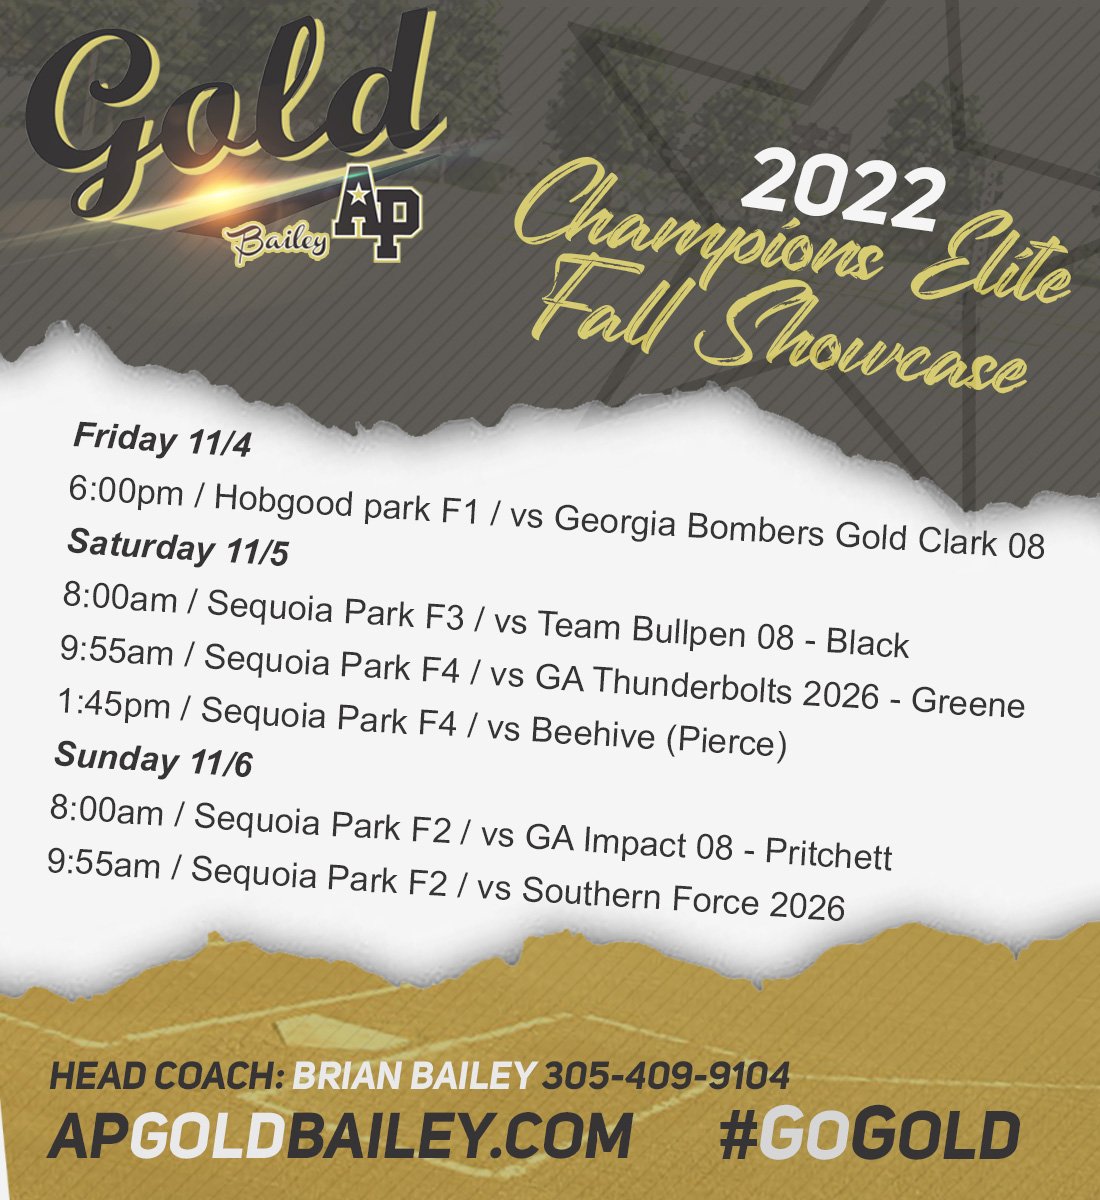 Let's get it started! Champions Elite Fall Showcase. 💛🖤🤍 #goodasgold #apgoldbailey